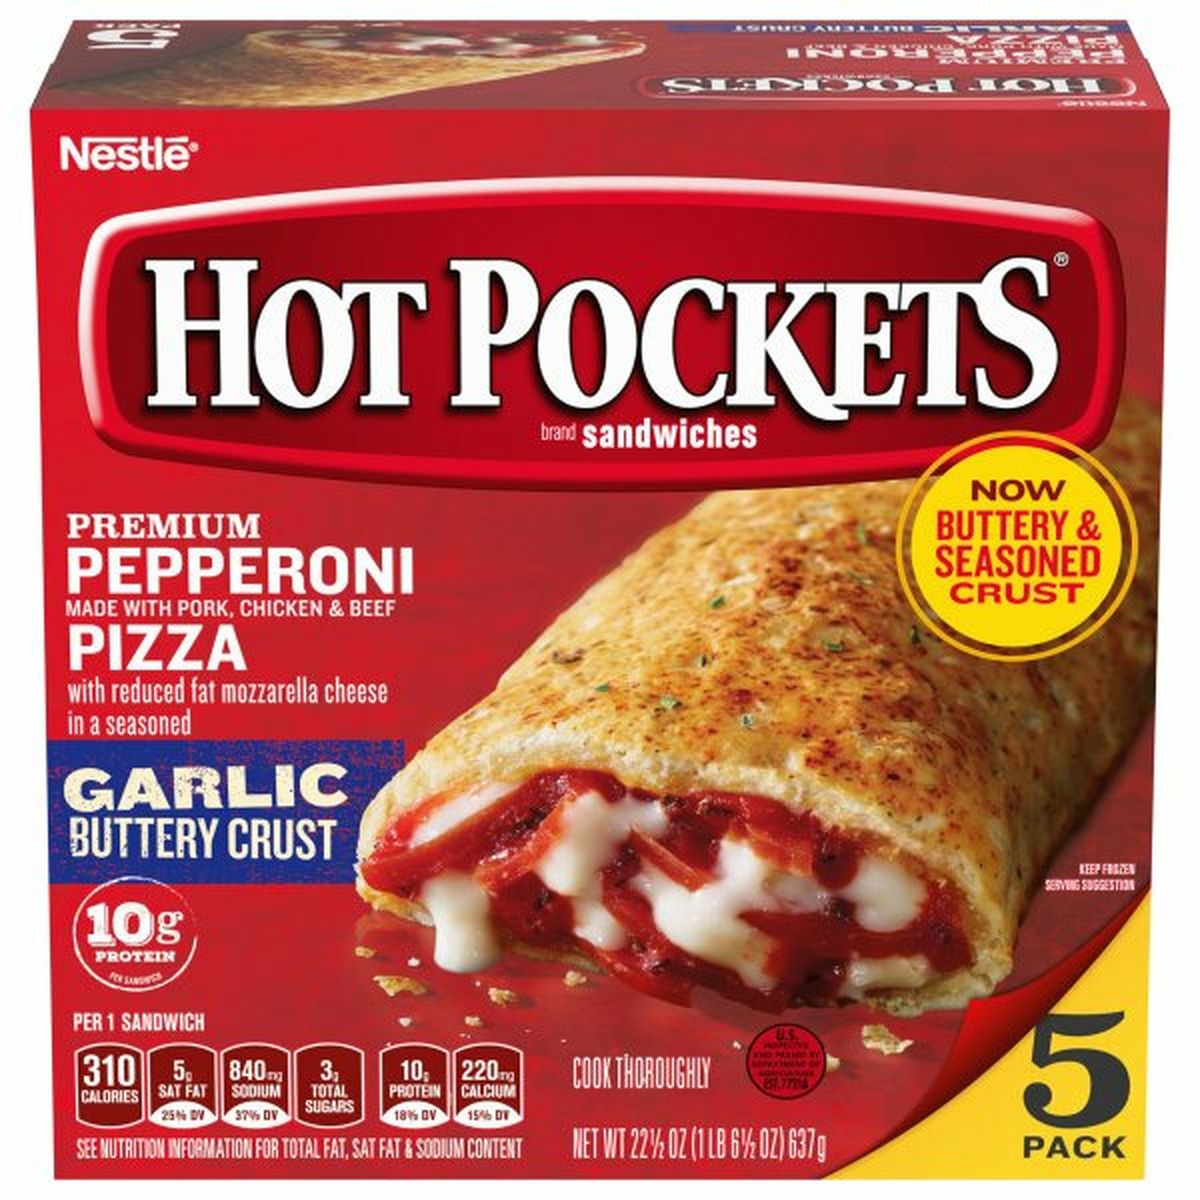 Calories in Hot Pockets Sandwiches, Pepperoni Pizza, Premium, Garlic Buttery Crust, 5 Pack